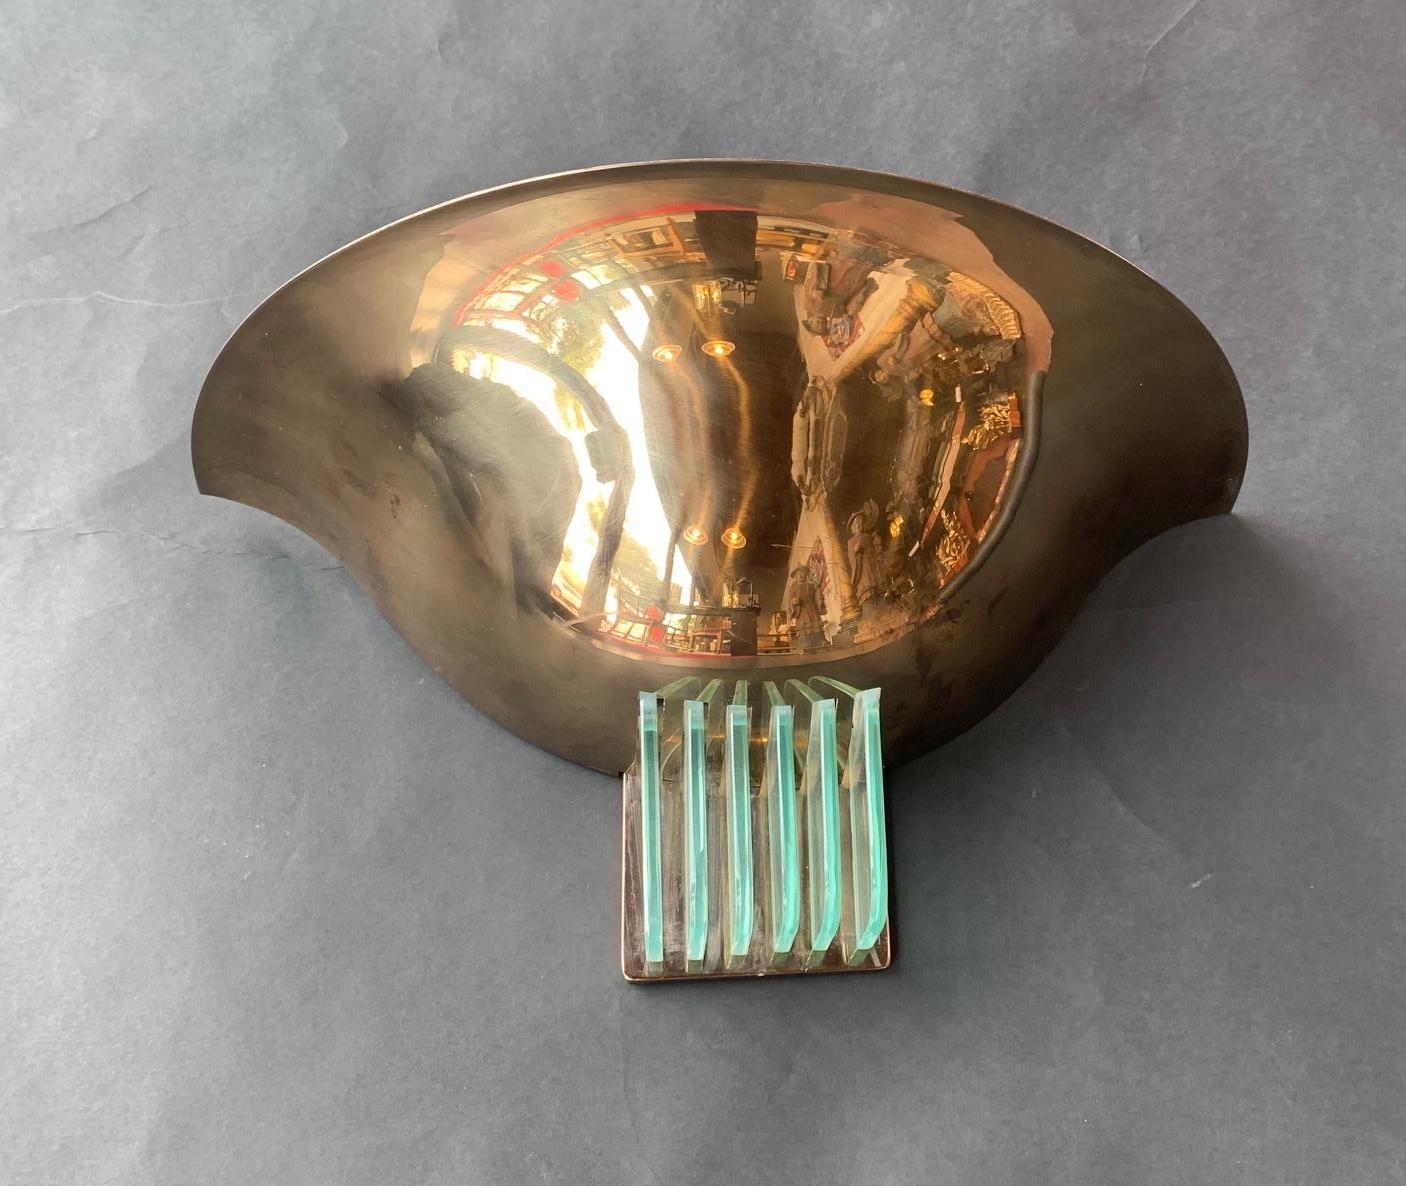 Pair of Italian Art Deco sconces with brass and glass, Italy, 1950s.